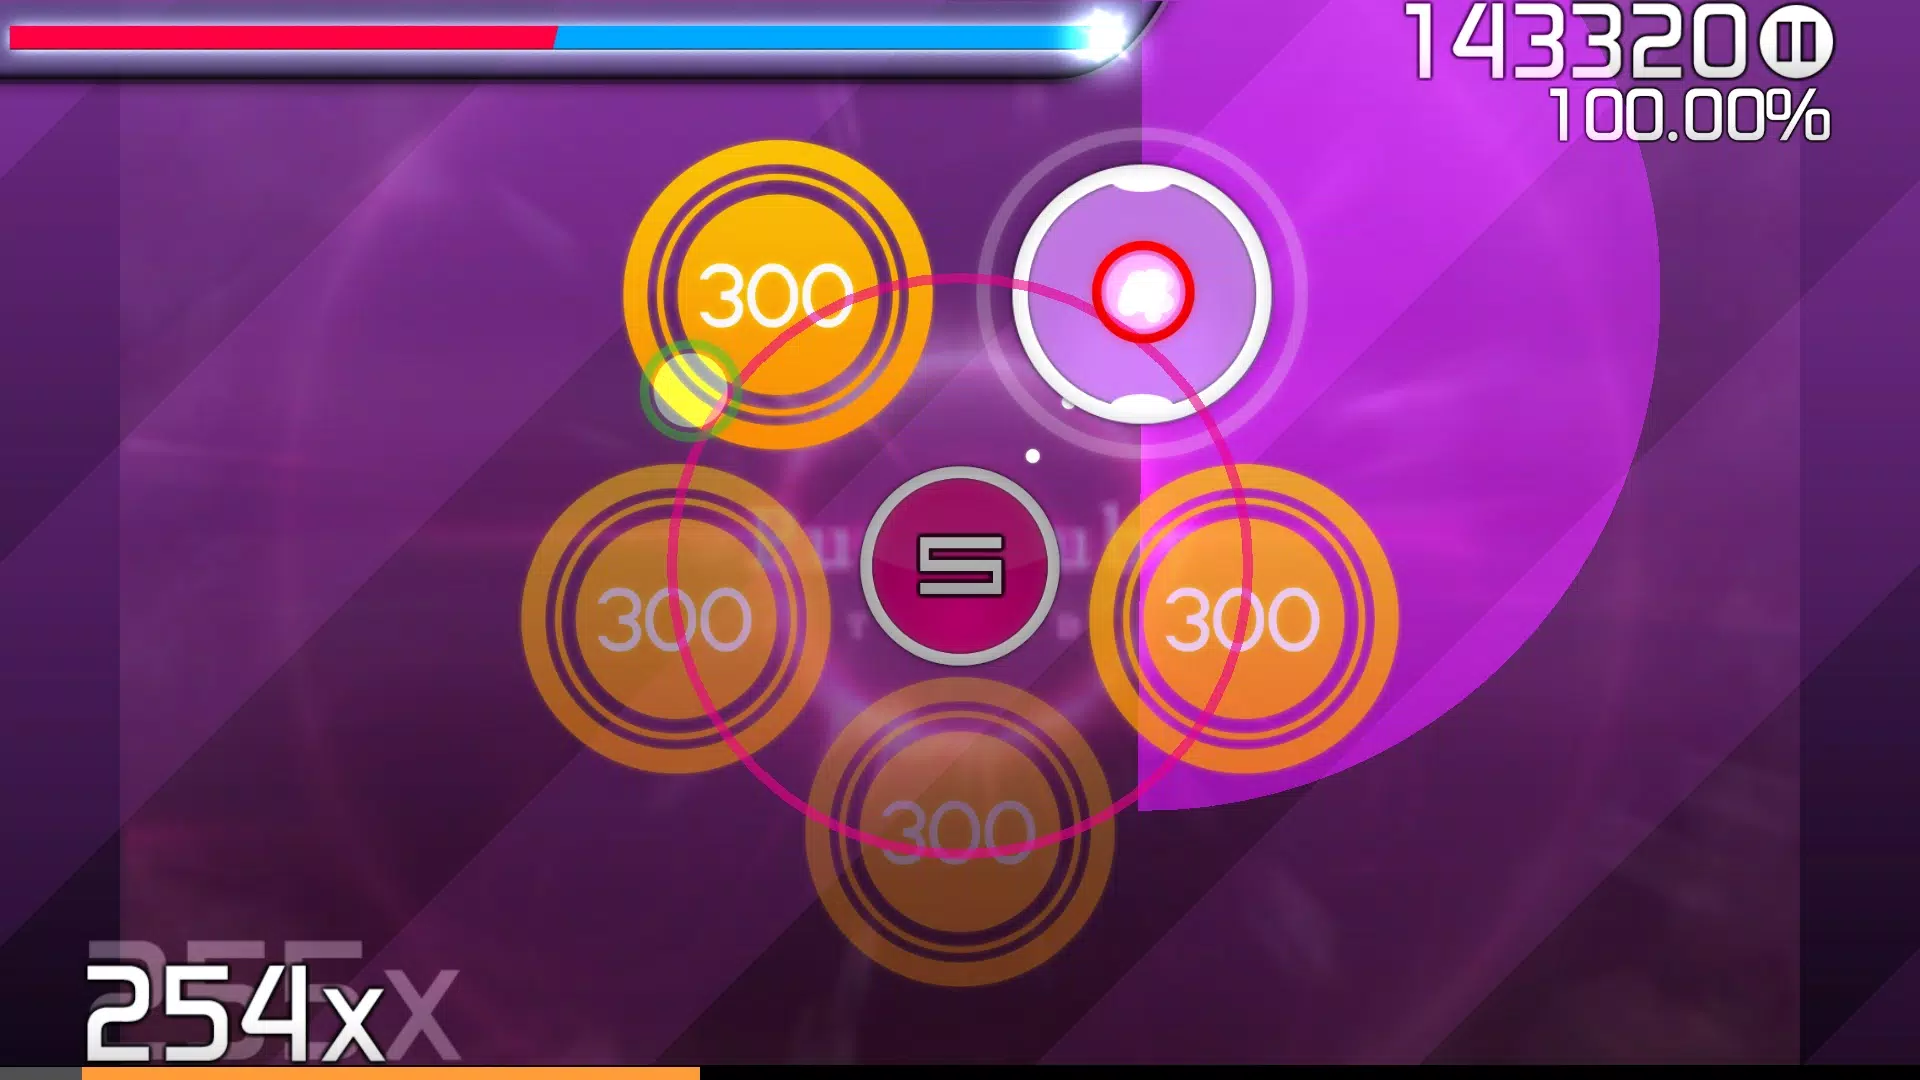 osu!droid for Android - Download the APK from Uptodown